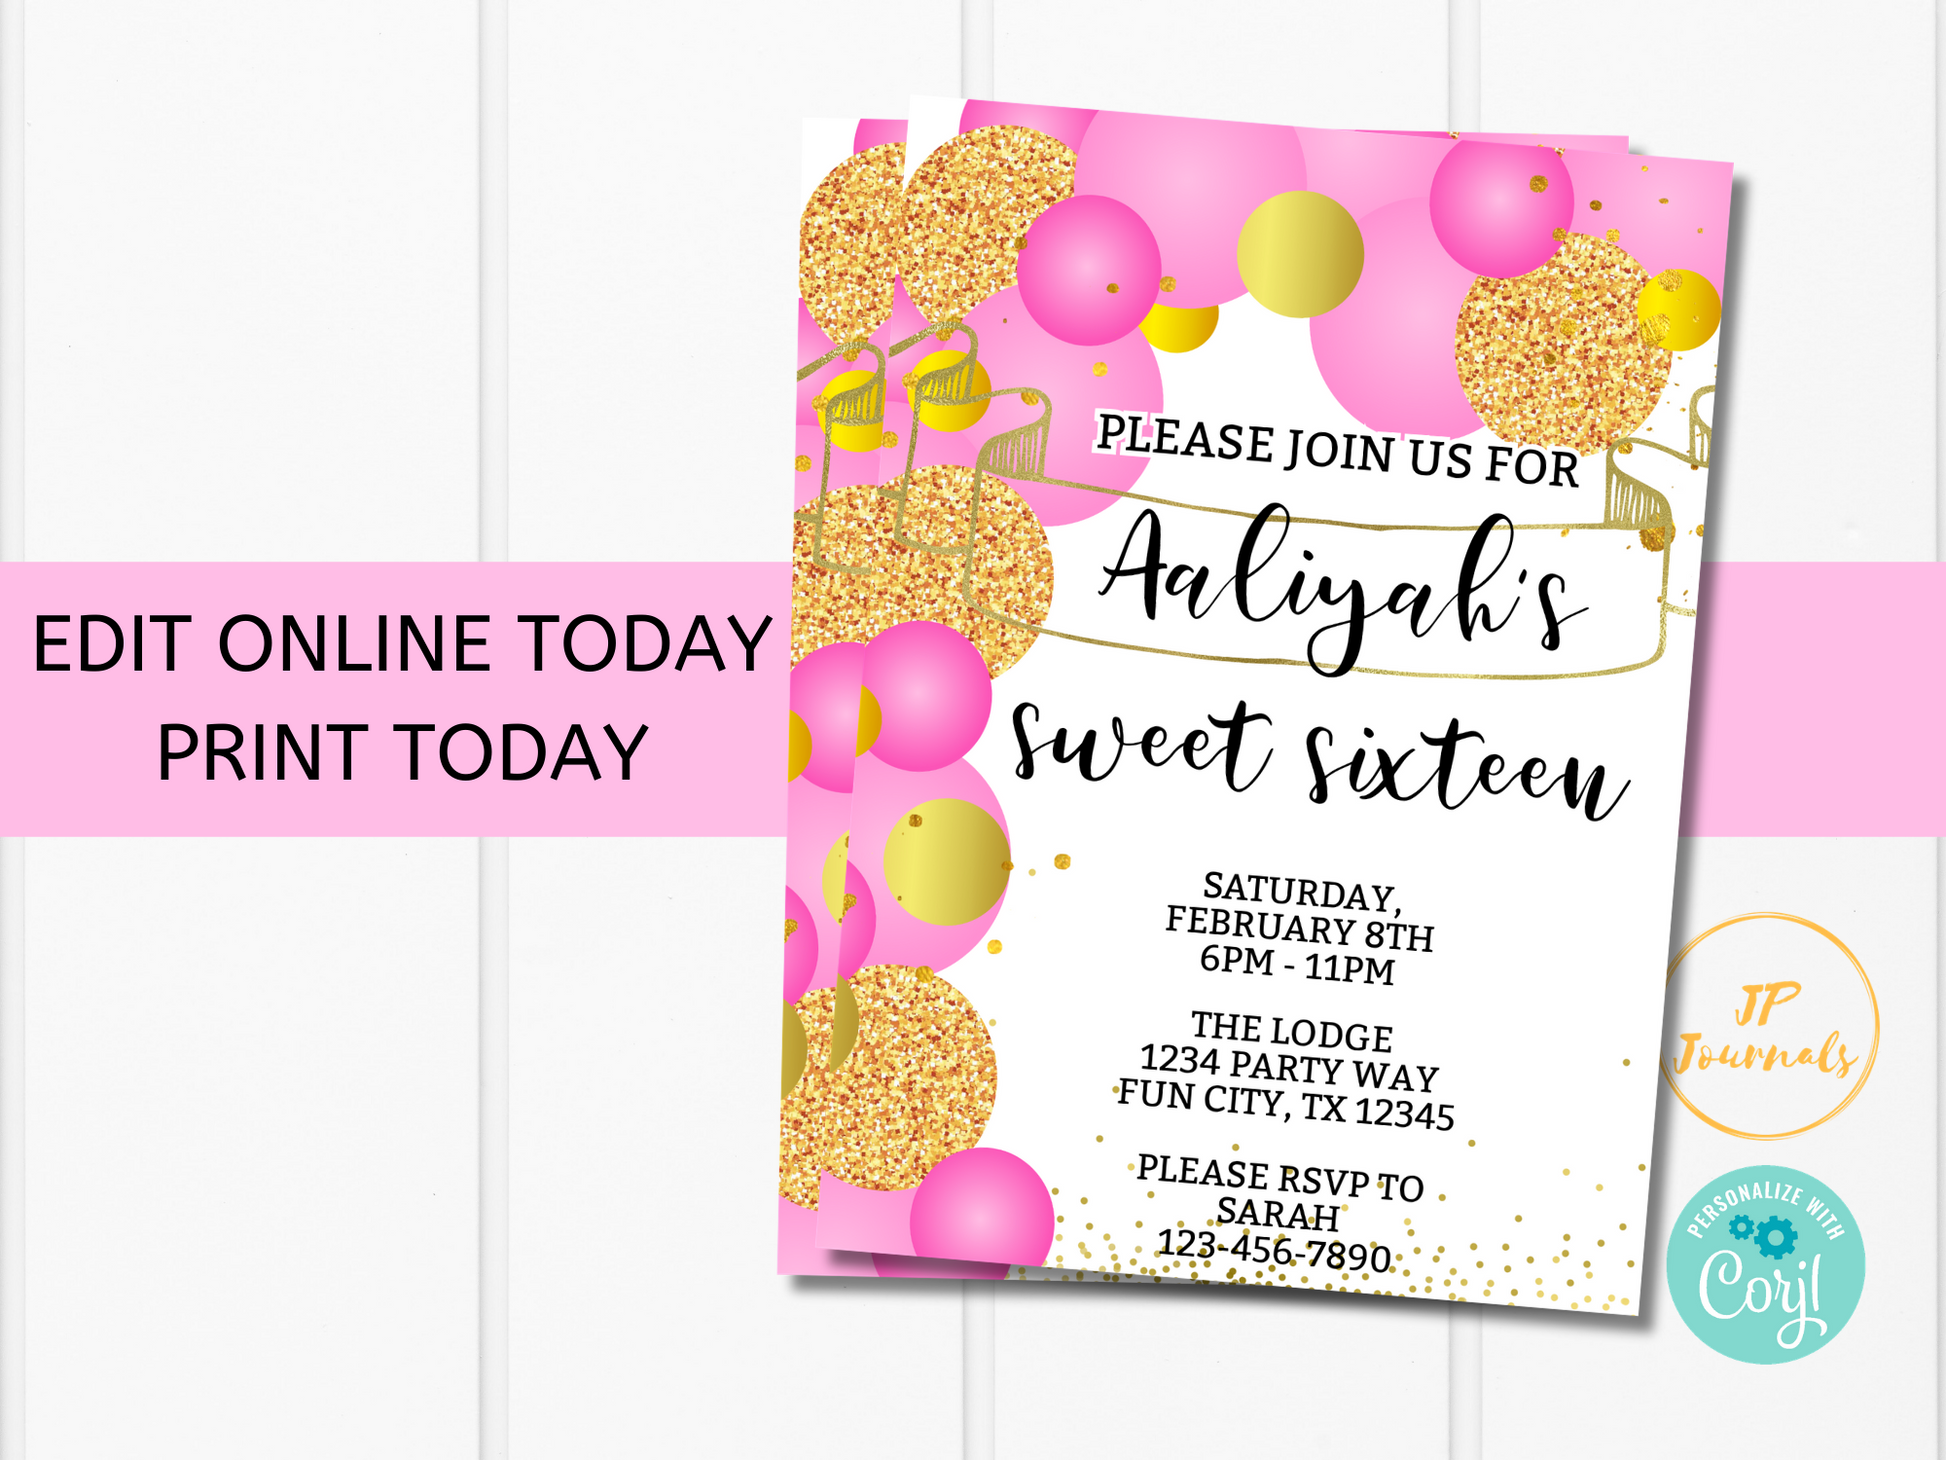 Printable Girl Birthday Party Invitation Template - Edit Online Print at Home - Pink Gold